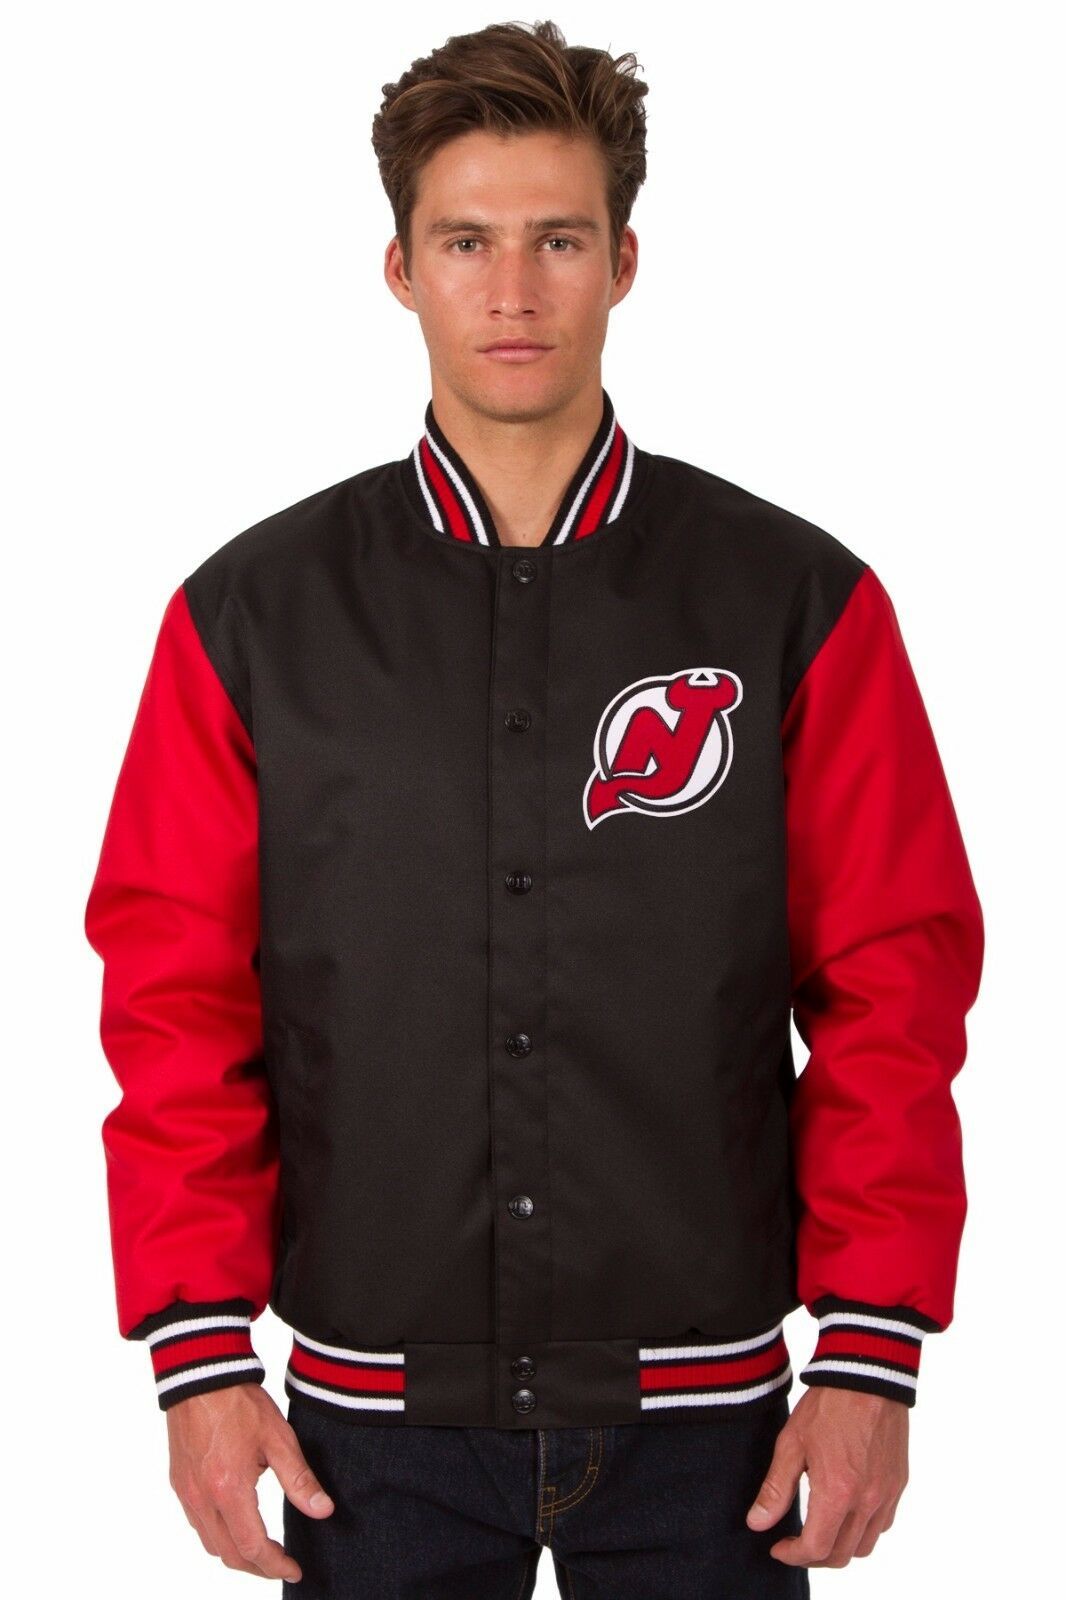 NHL New Jersey Devils Poly Twill Jacket  Black  Red Patch Logos JH Design - $99.99 - $129.99